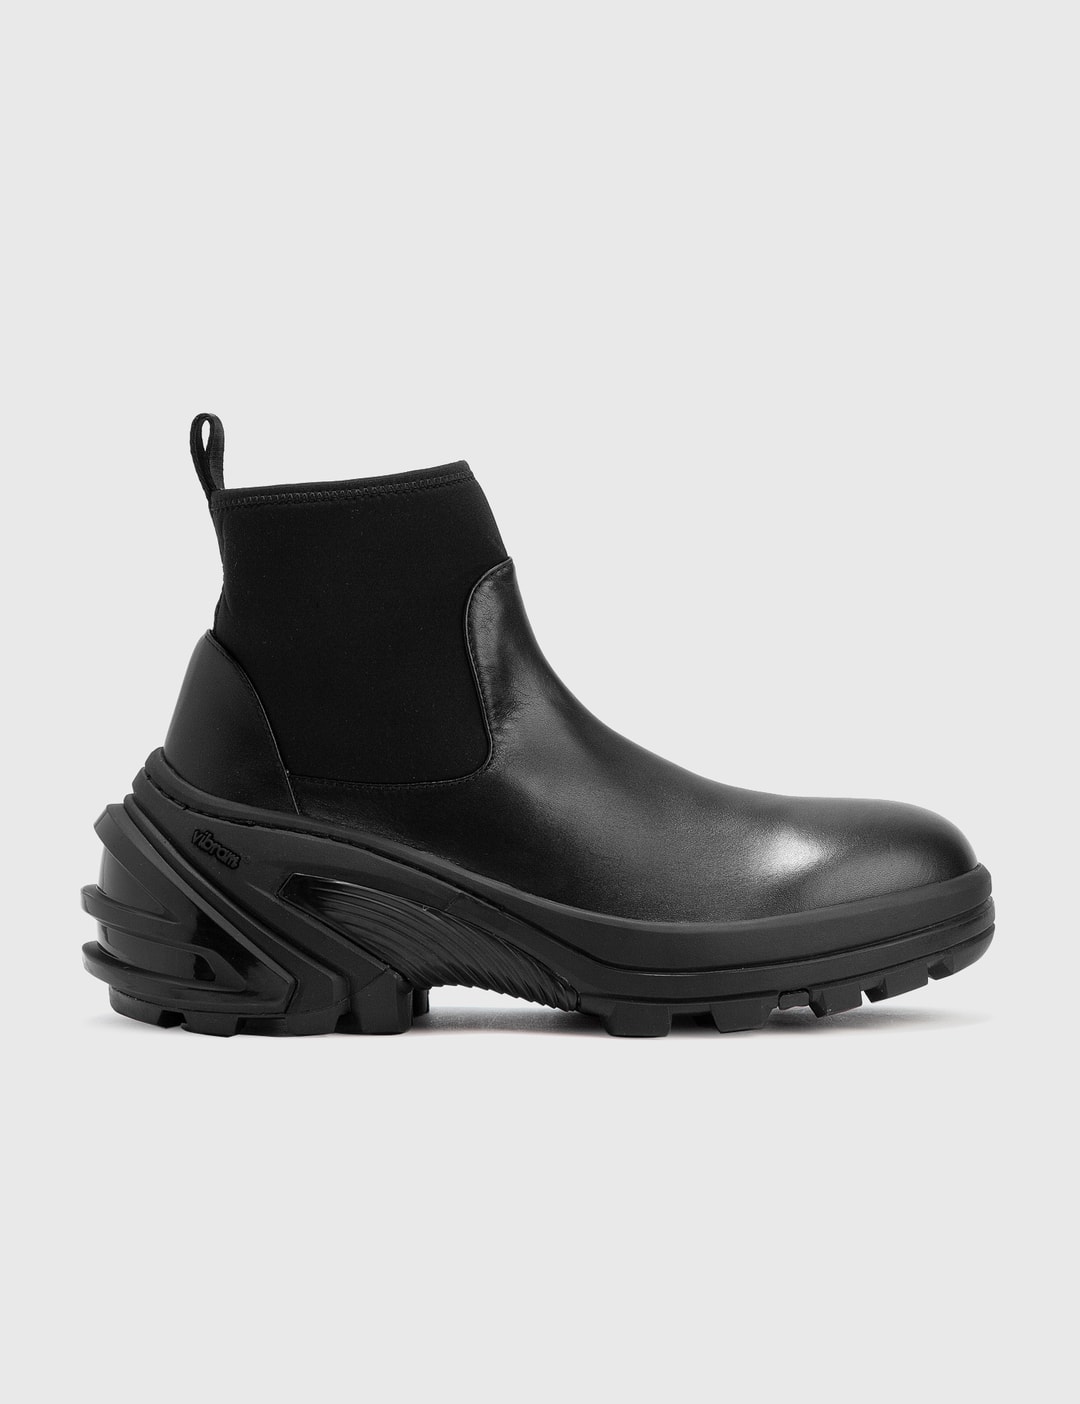 1017 ALYX 9SM - Leather Mid Boot With Platform Sole | HBX - Globally ...